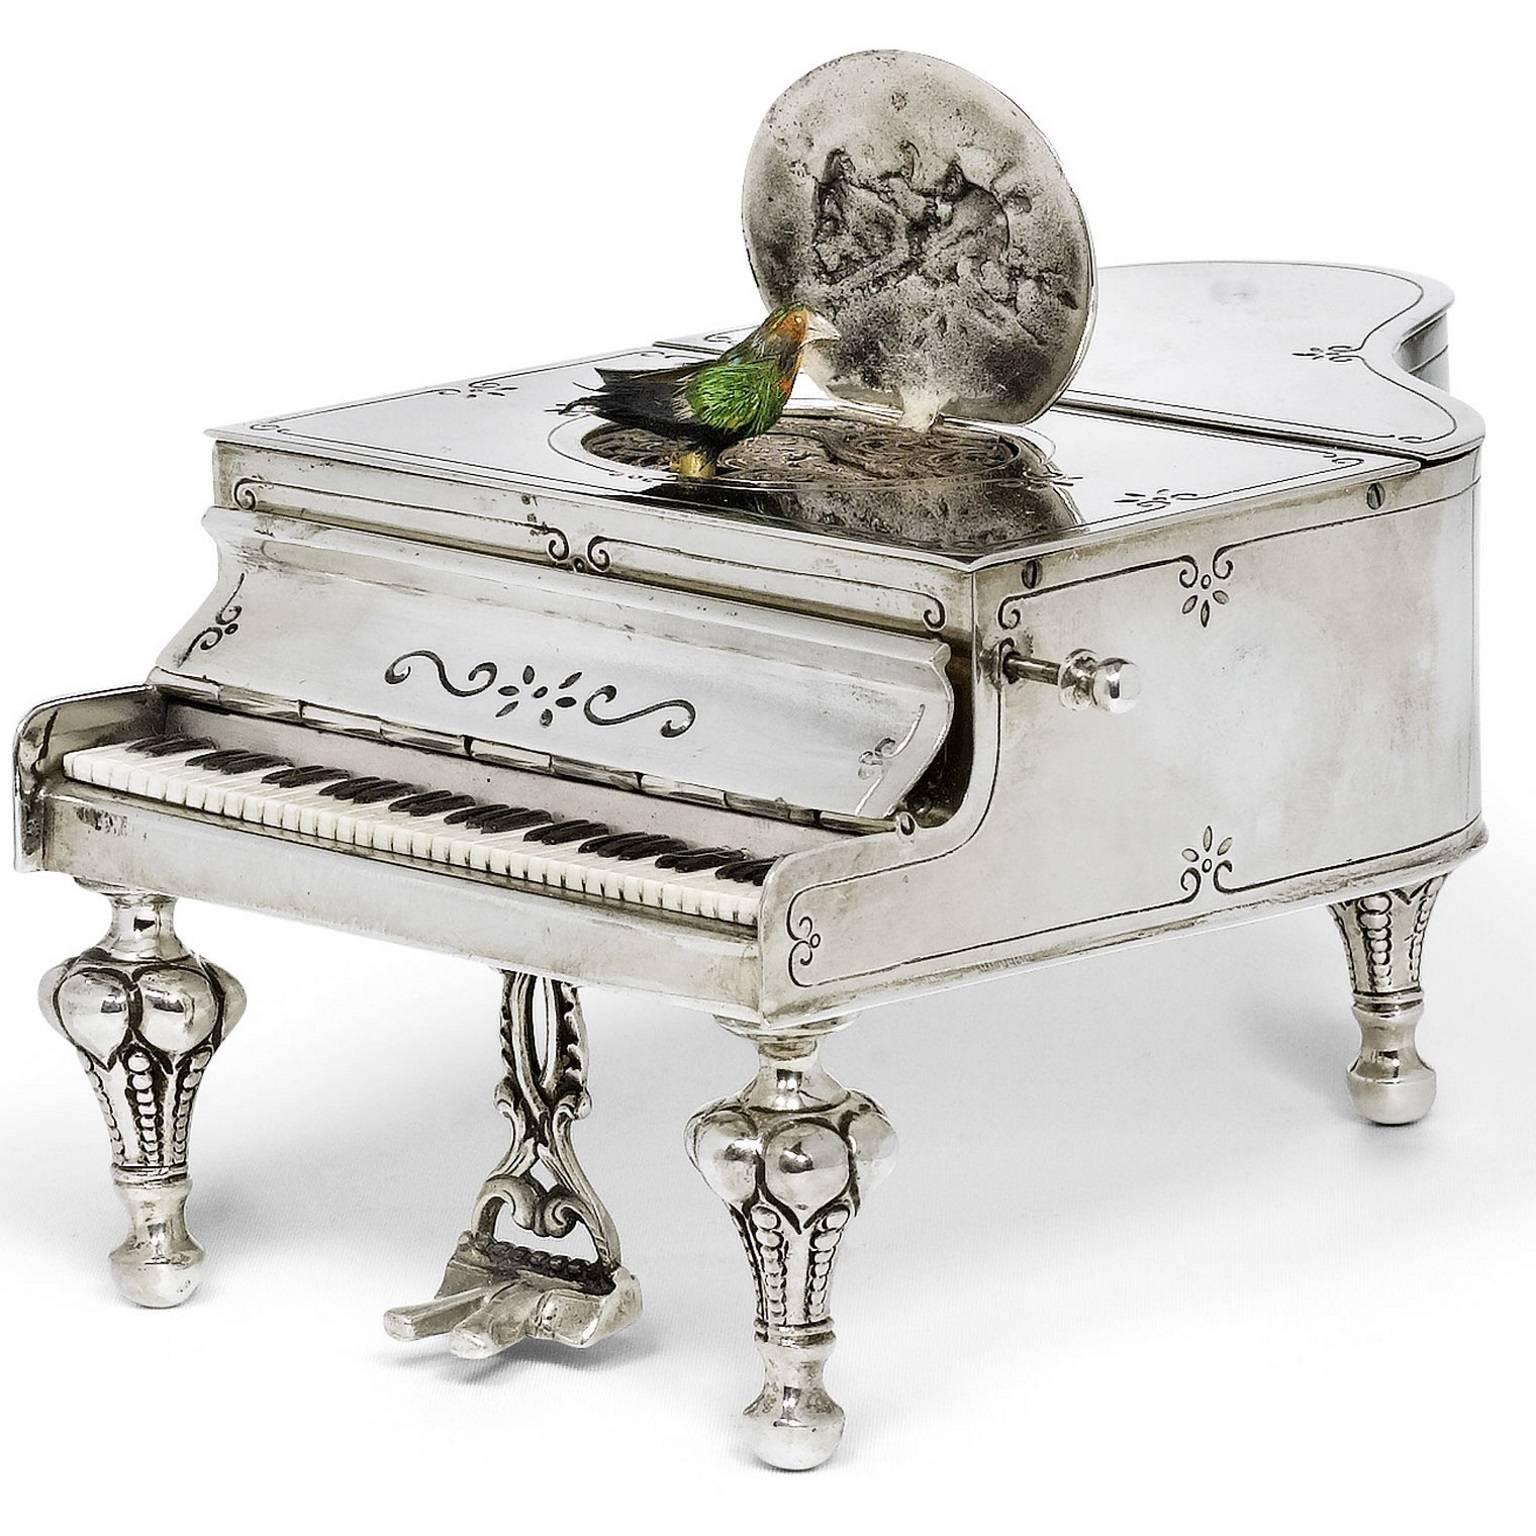 This charming antique silver musical box features a singing bird, which appears from an opening oval. The musical box is exquisitely crafted in the shape of a miniature grand piano, featuring a hinged medallion with emblems, a closing keyboard cover